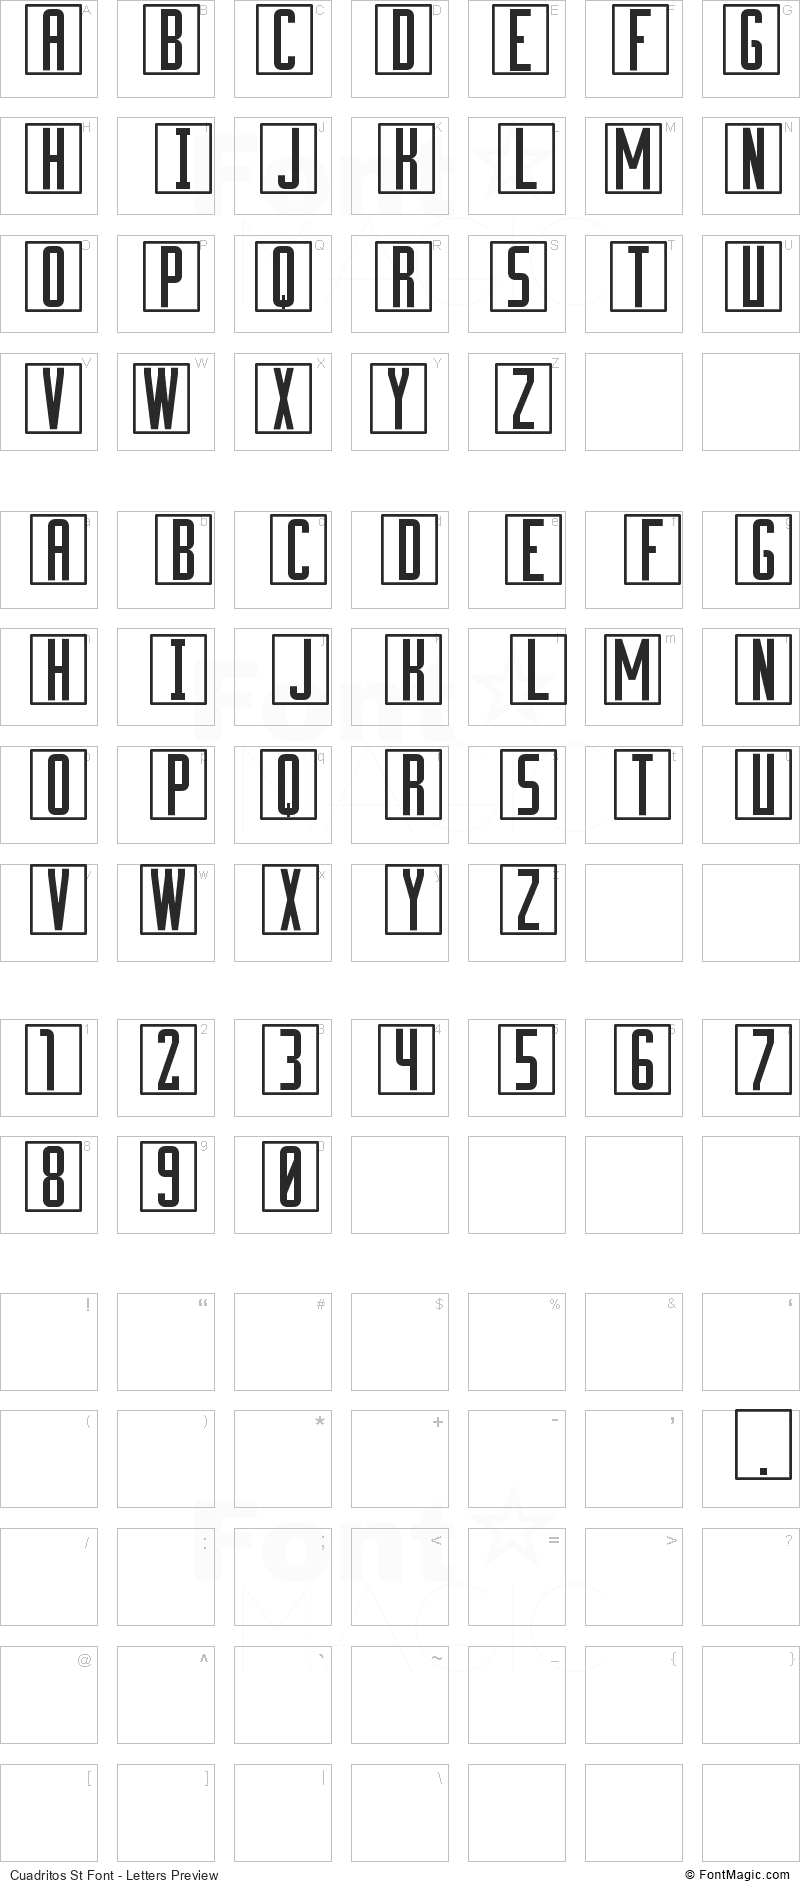 Cuadritos St Font - All Latters Preview Chart